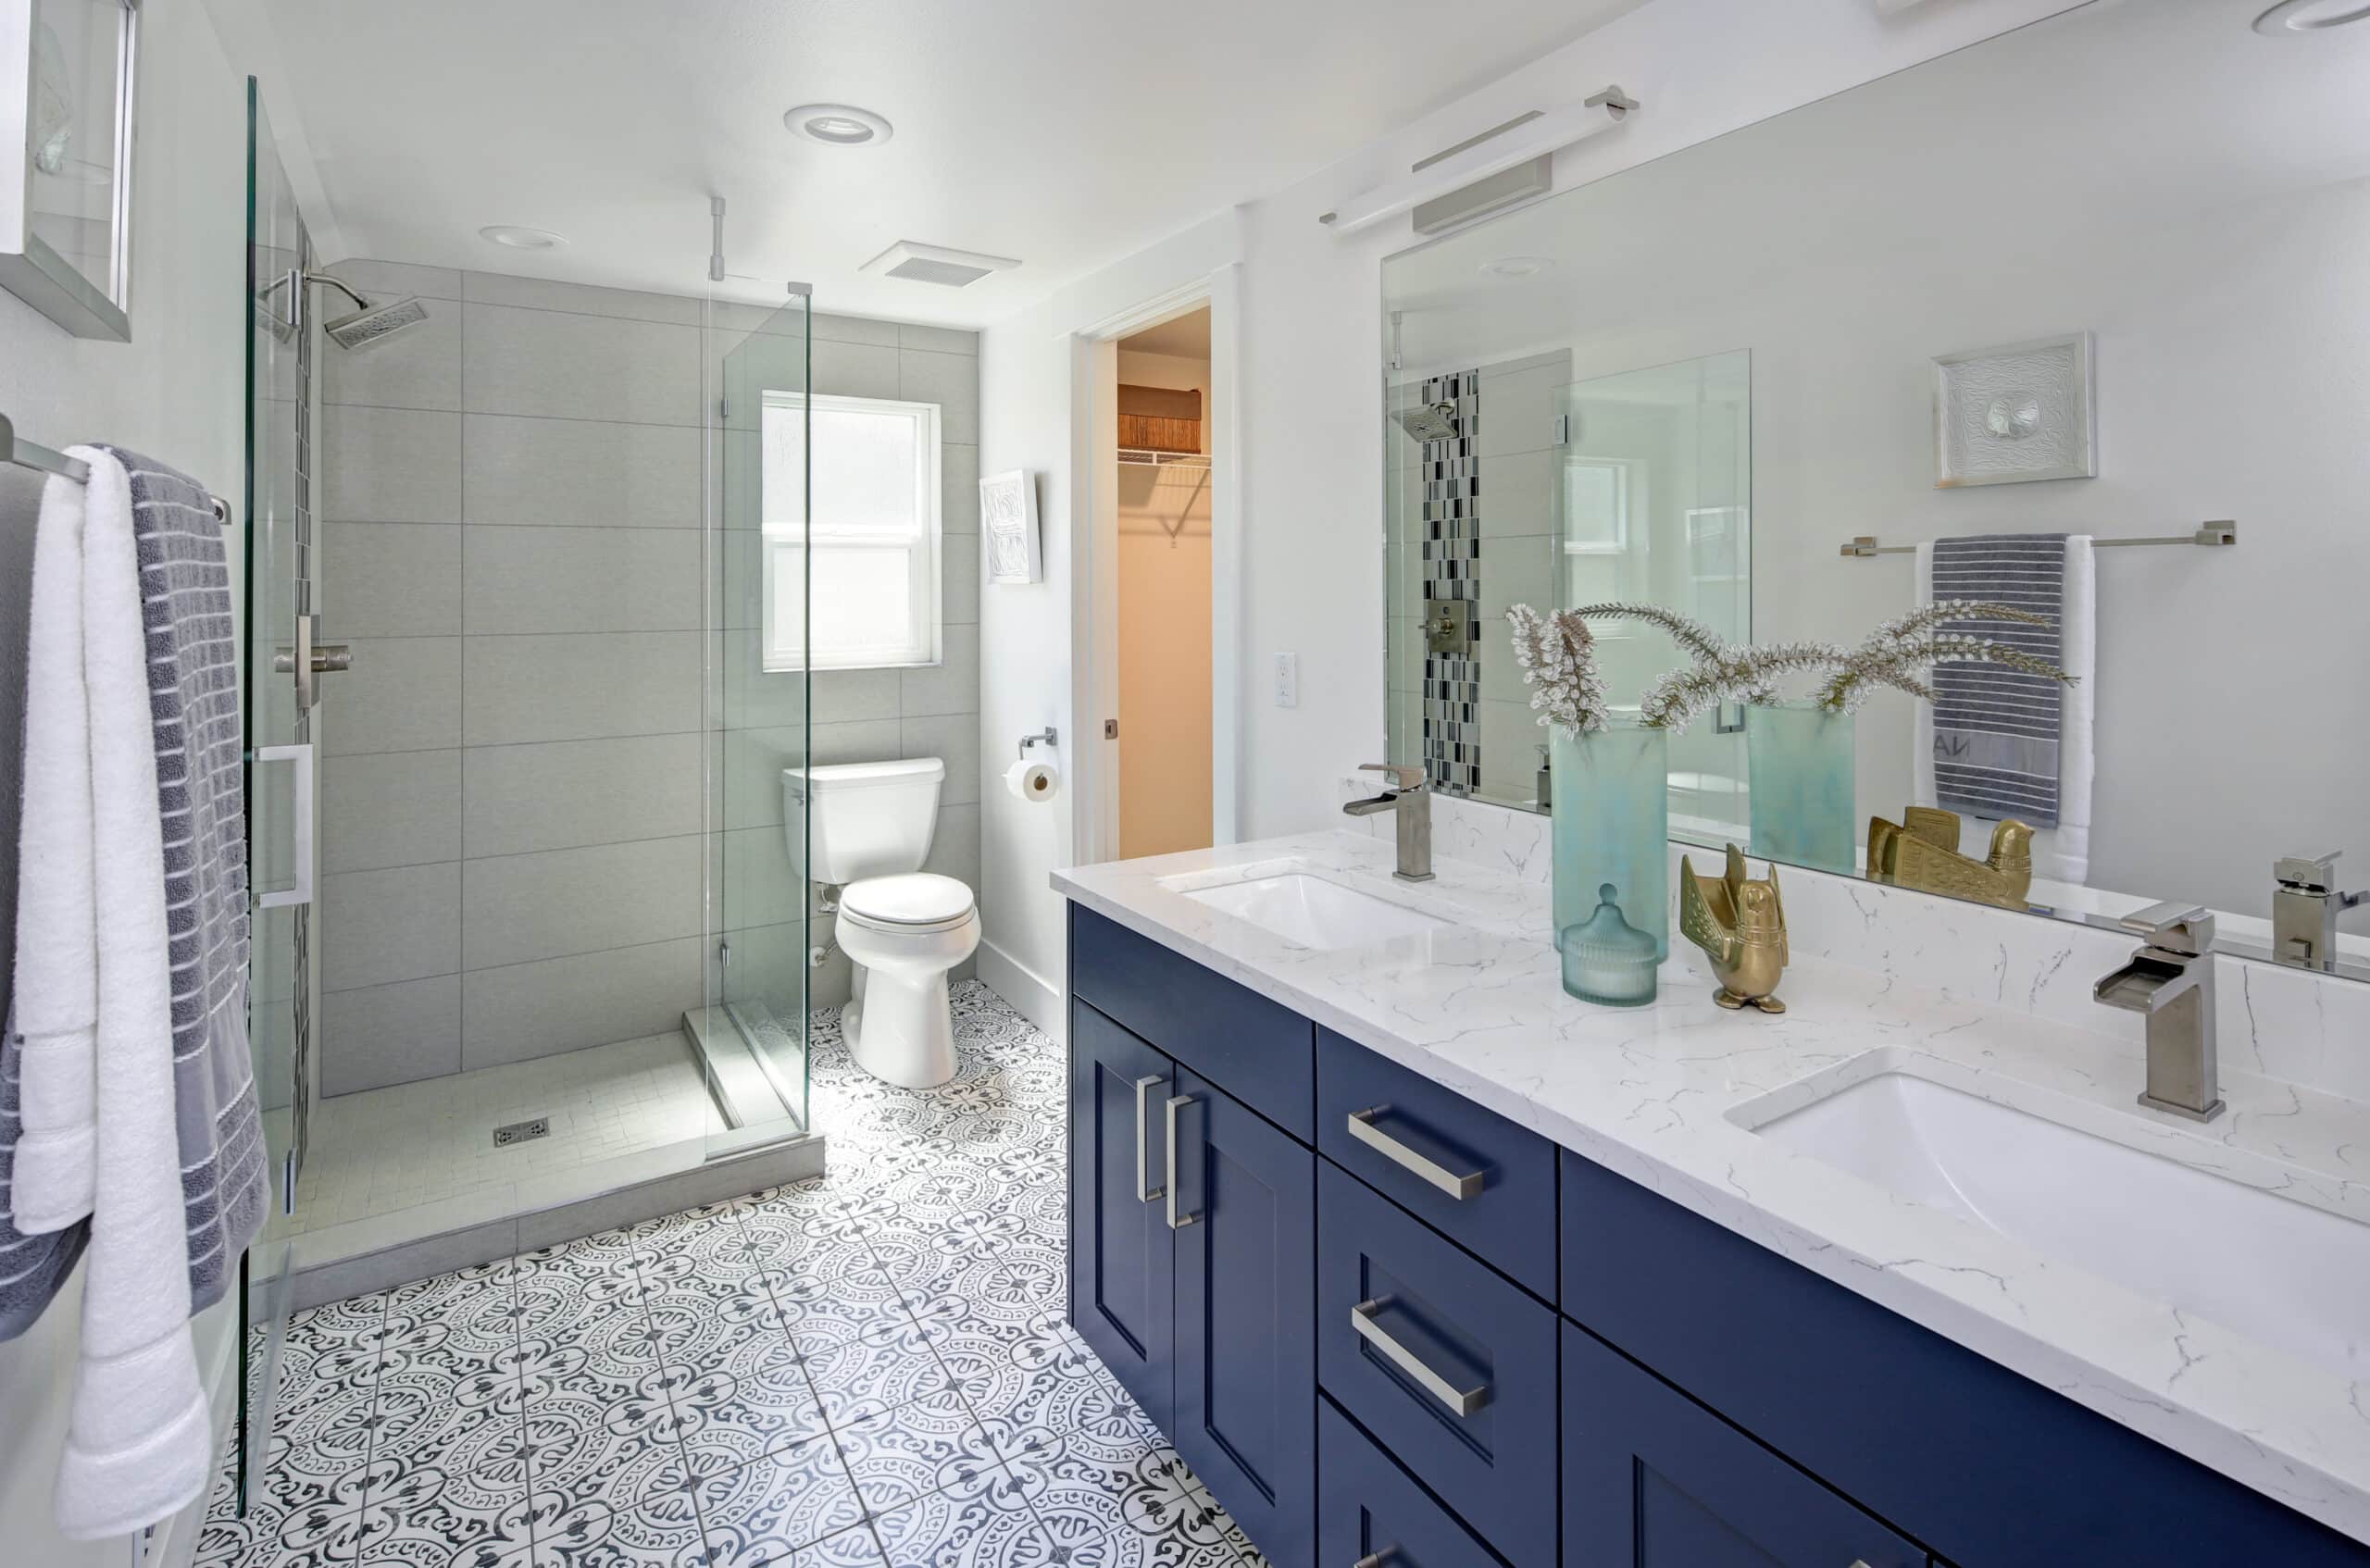 Modern bathroom interior with blue double vanity and glass shower.